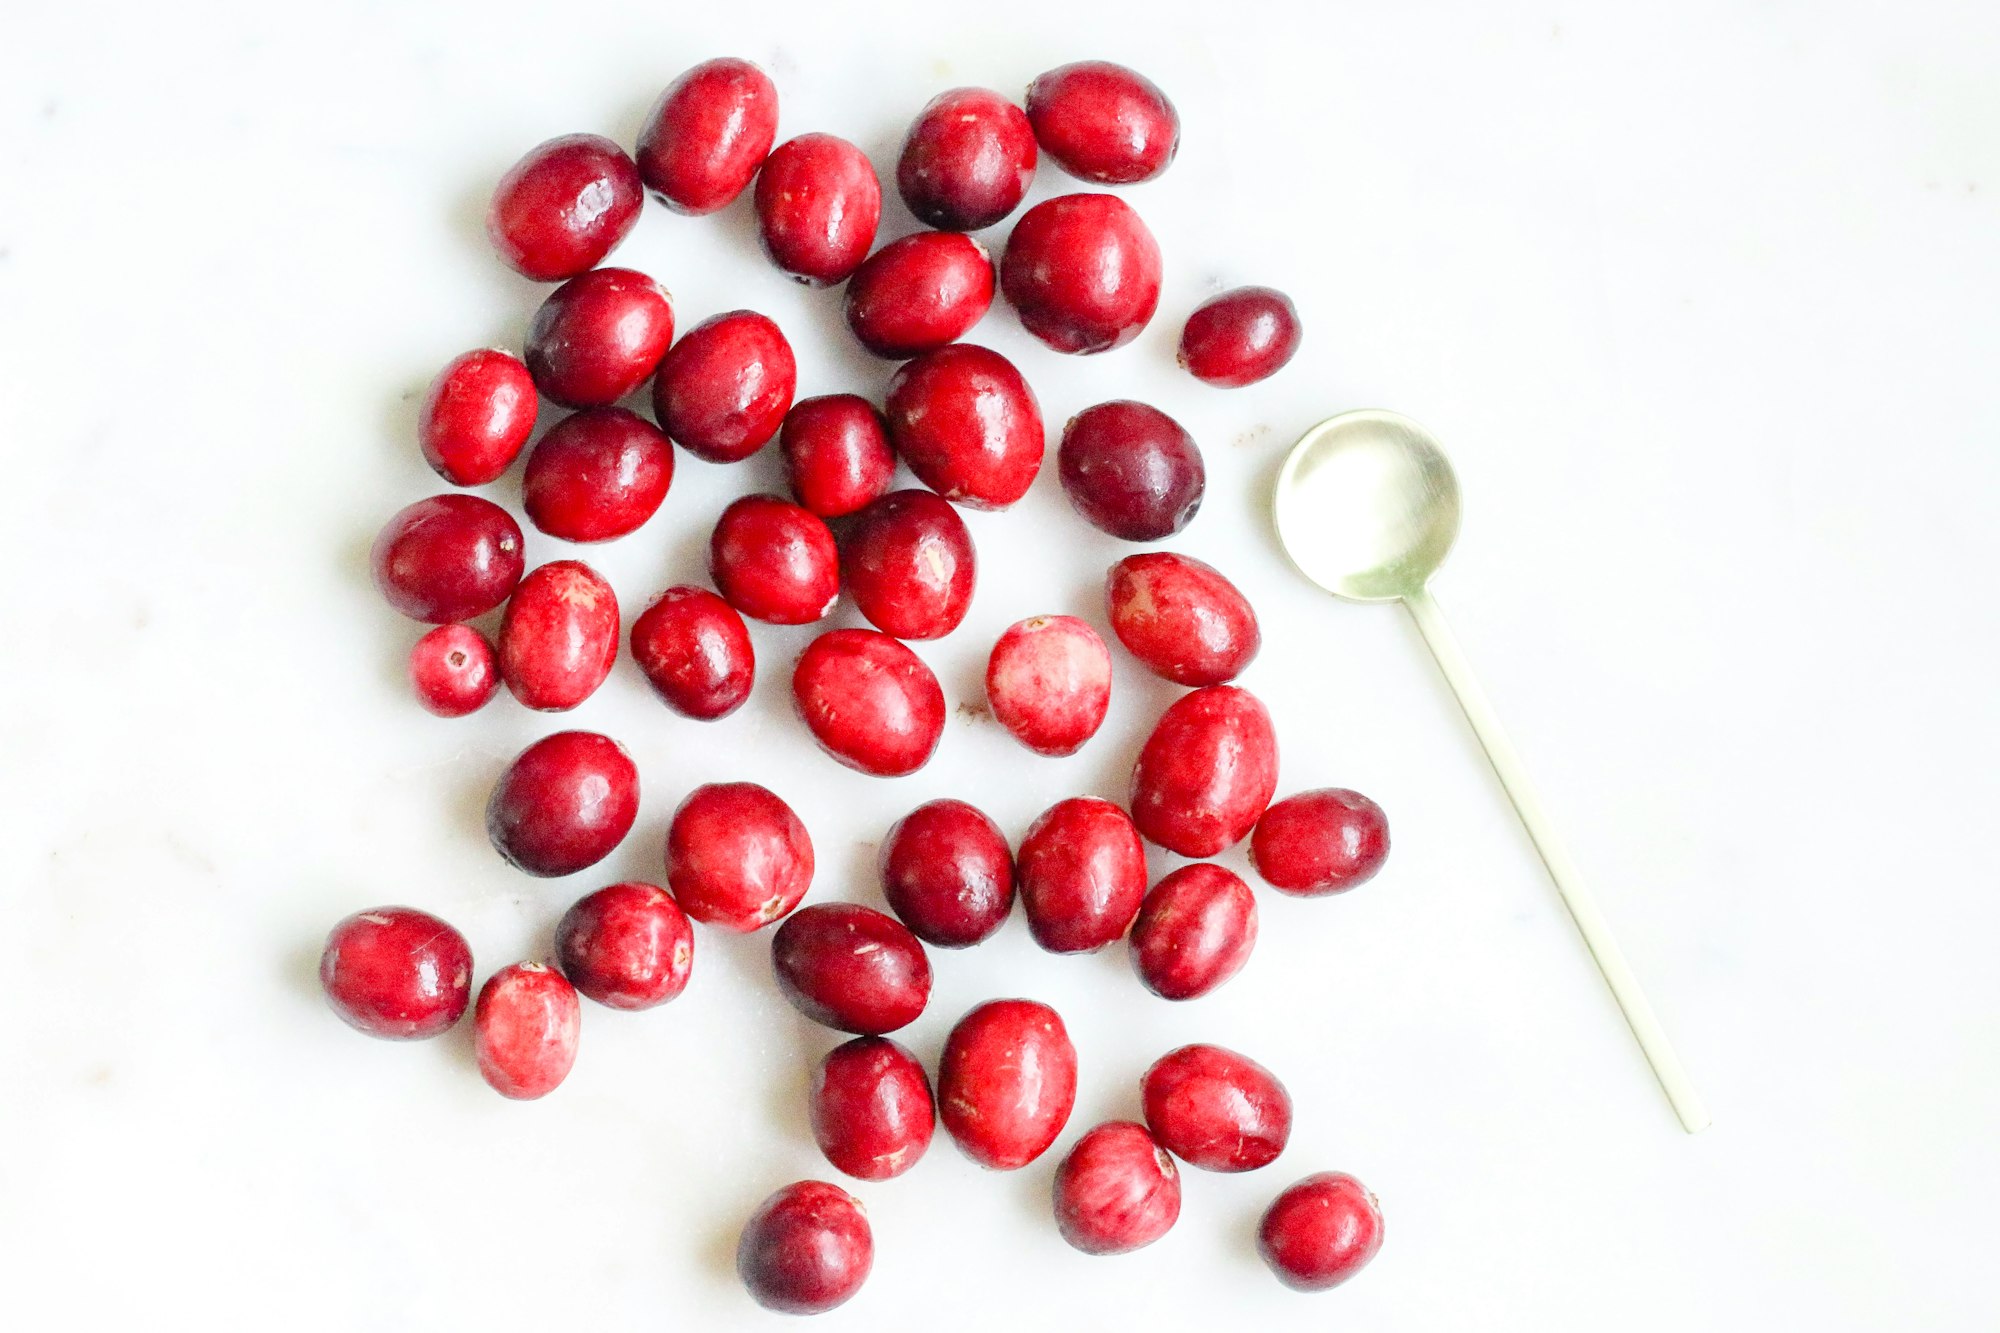 Cranberries are some of the world's most healthy fruits by Melissa Di Rocco for Unsplash.